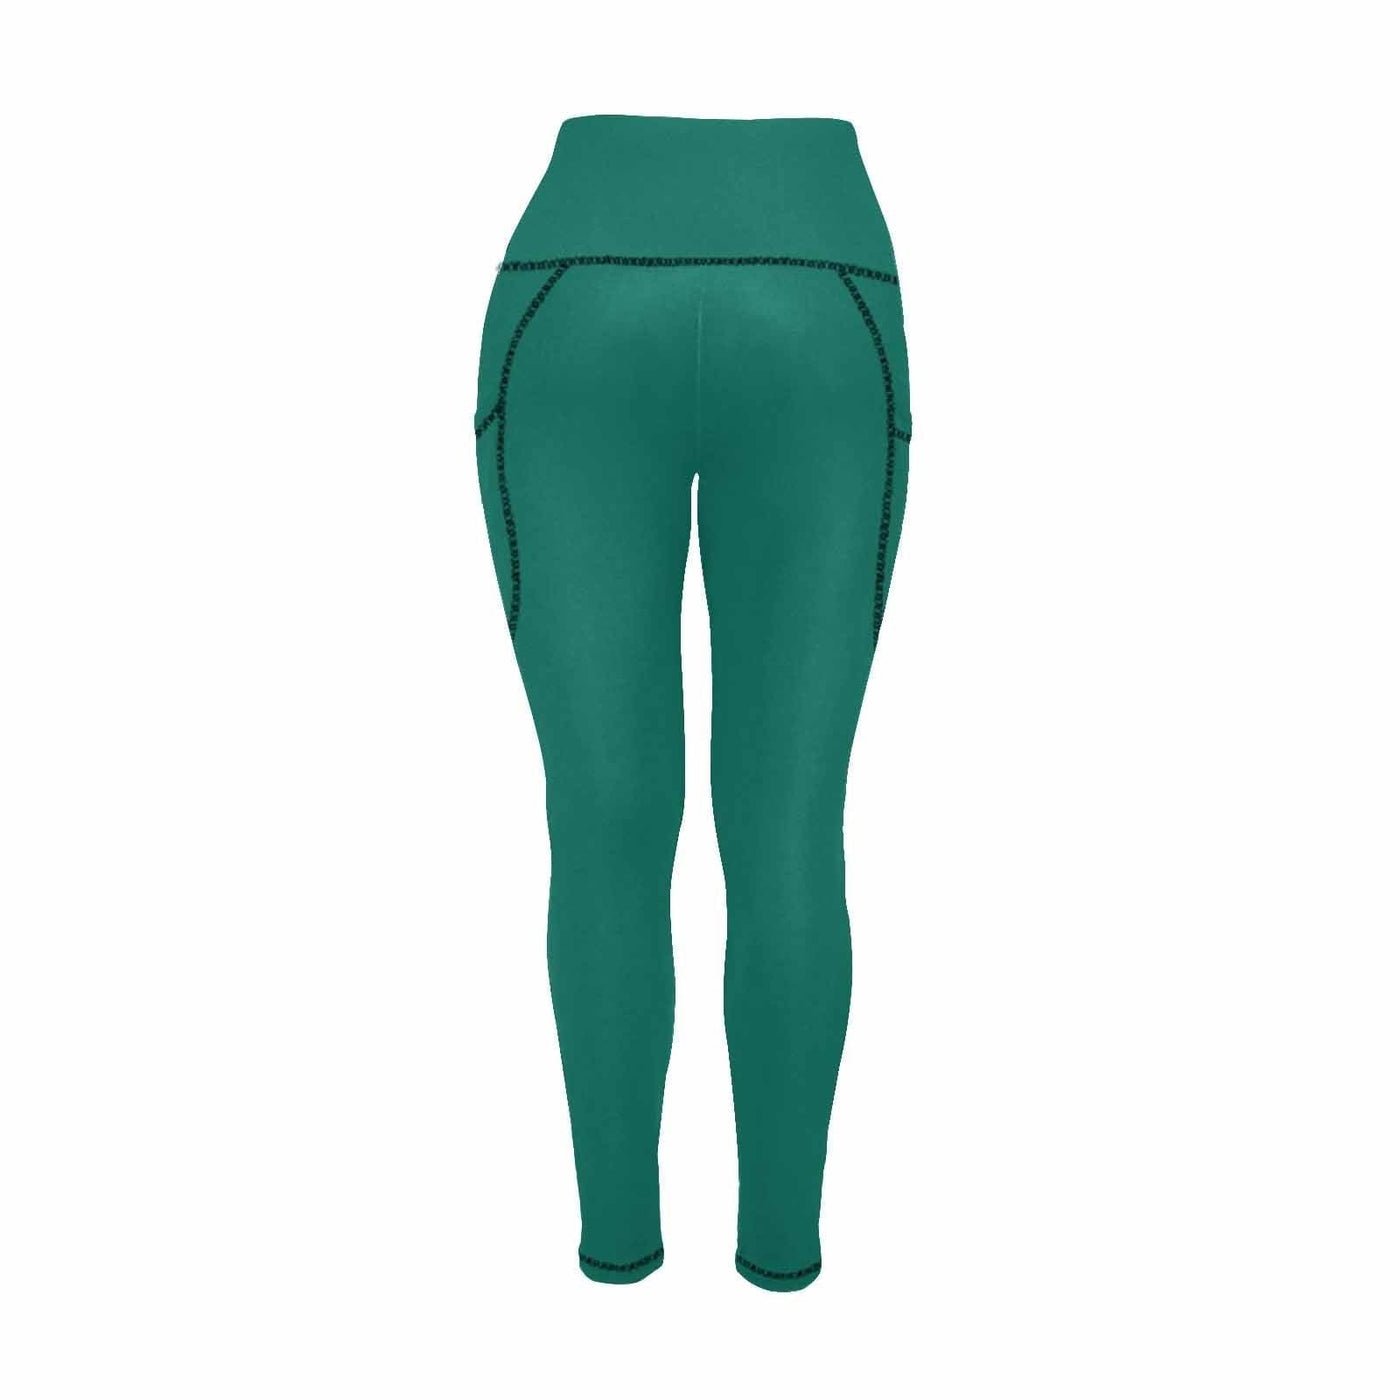 Womens Leggings With Pockets - Fitness Pants / Teal Green - Womens | Leggings